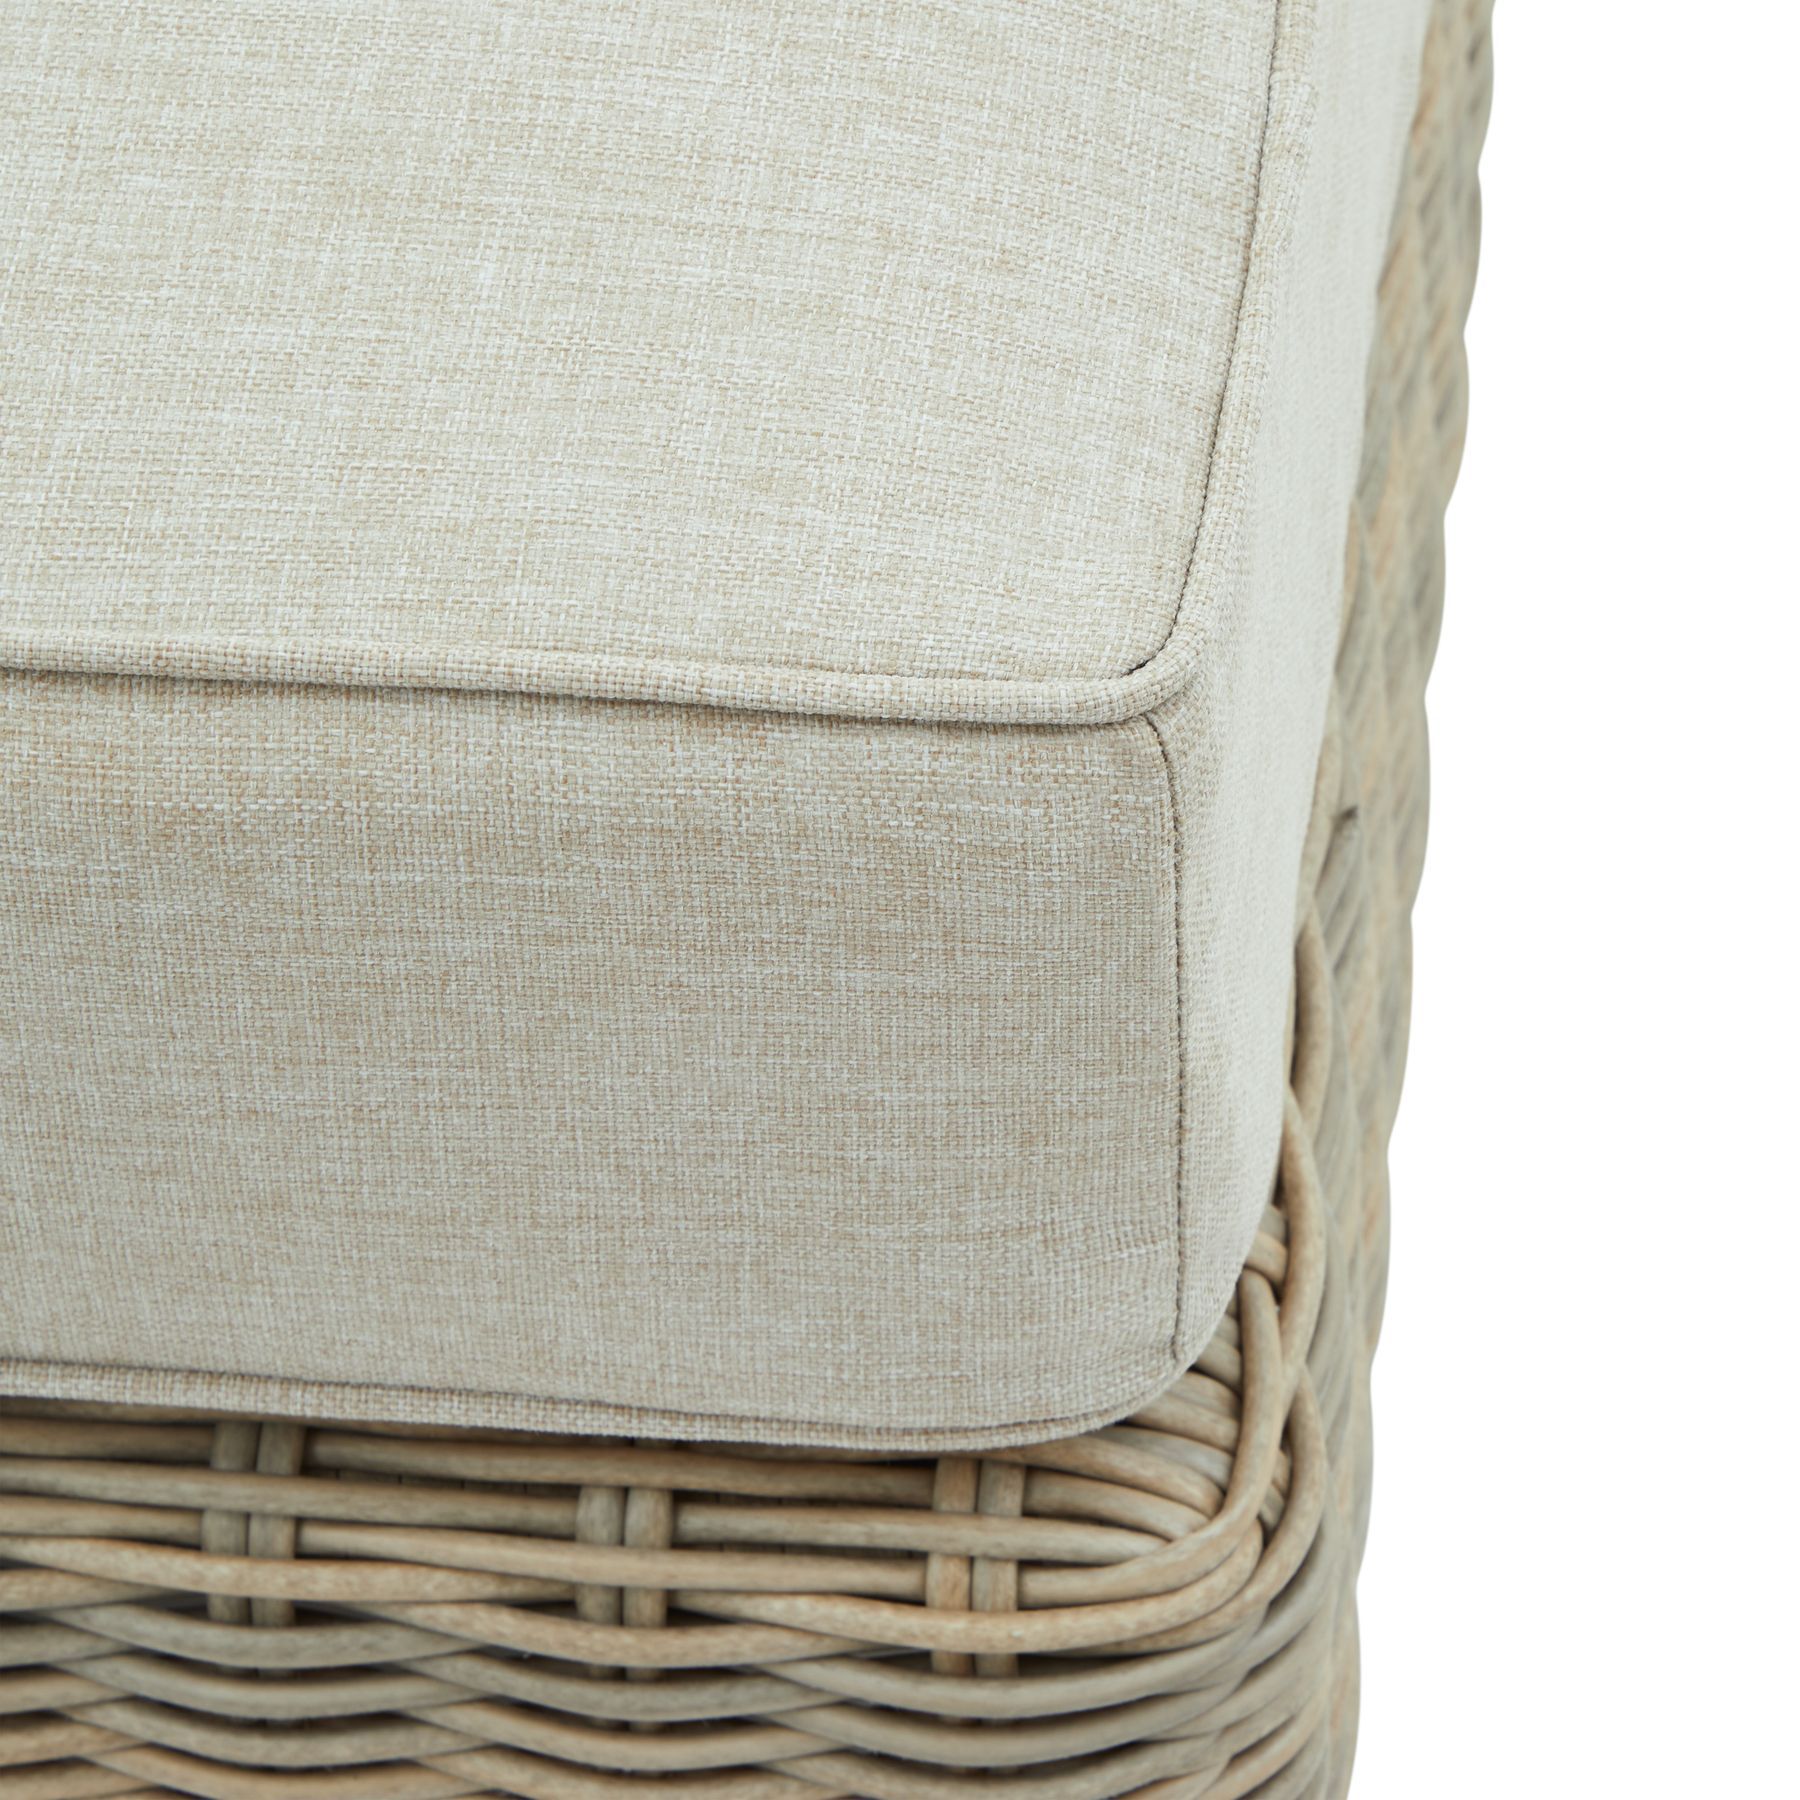 Capri Collection Outdoor Footstool - Image 2